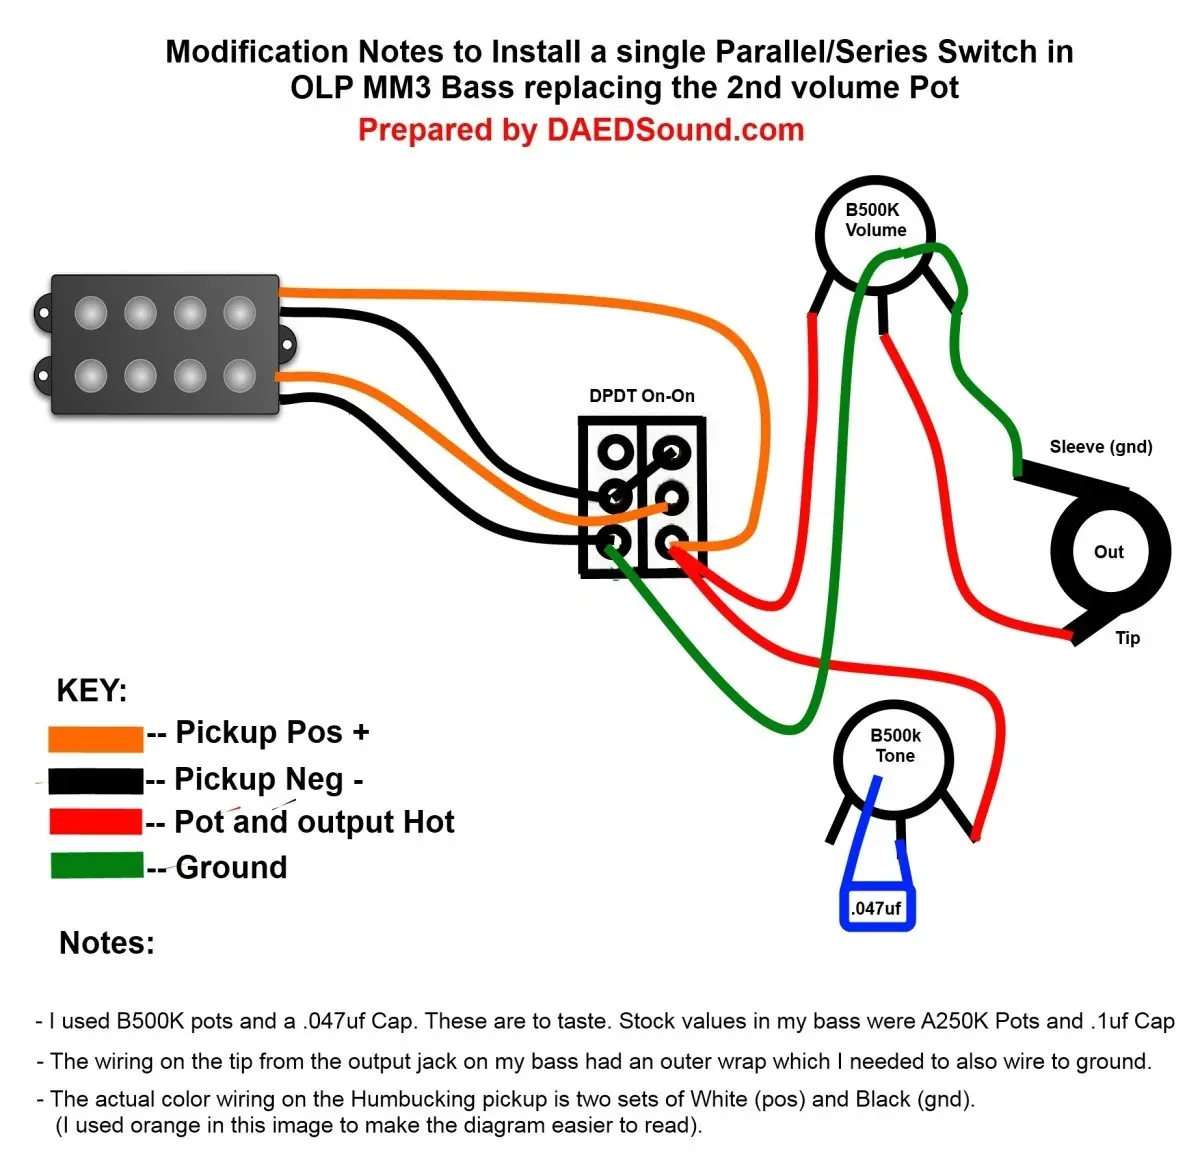 2539-olp_mm3_series_parallel_switch_dpdt_mod.